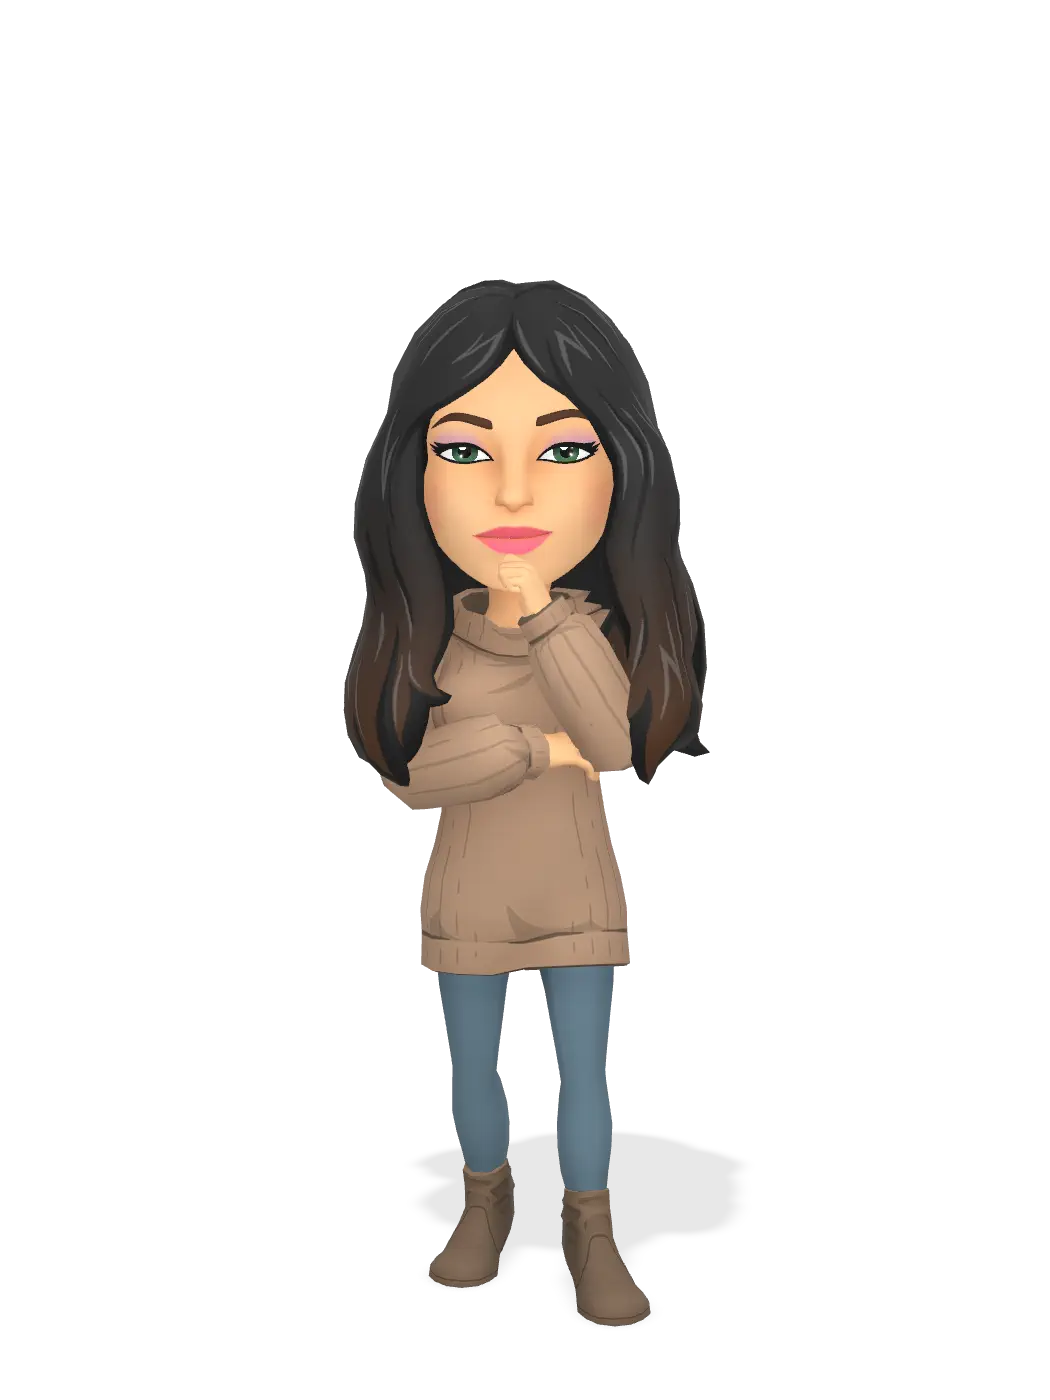 3D Bitmoji for justhappymommy